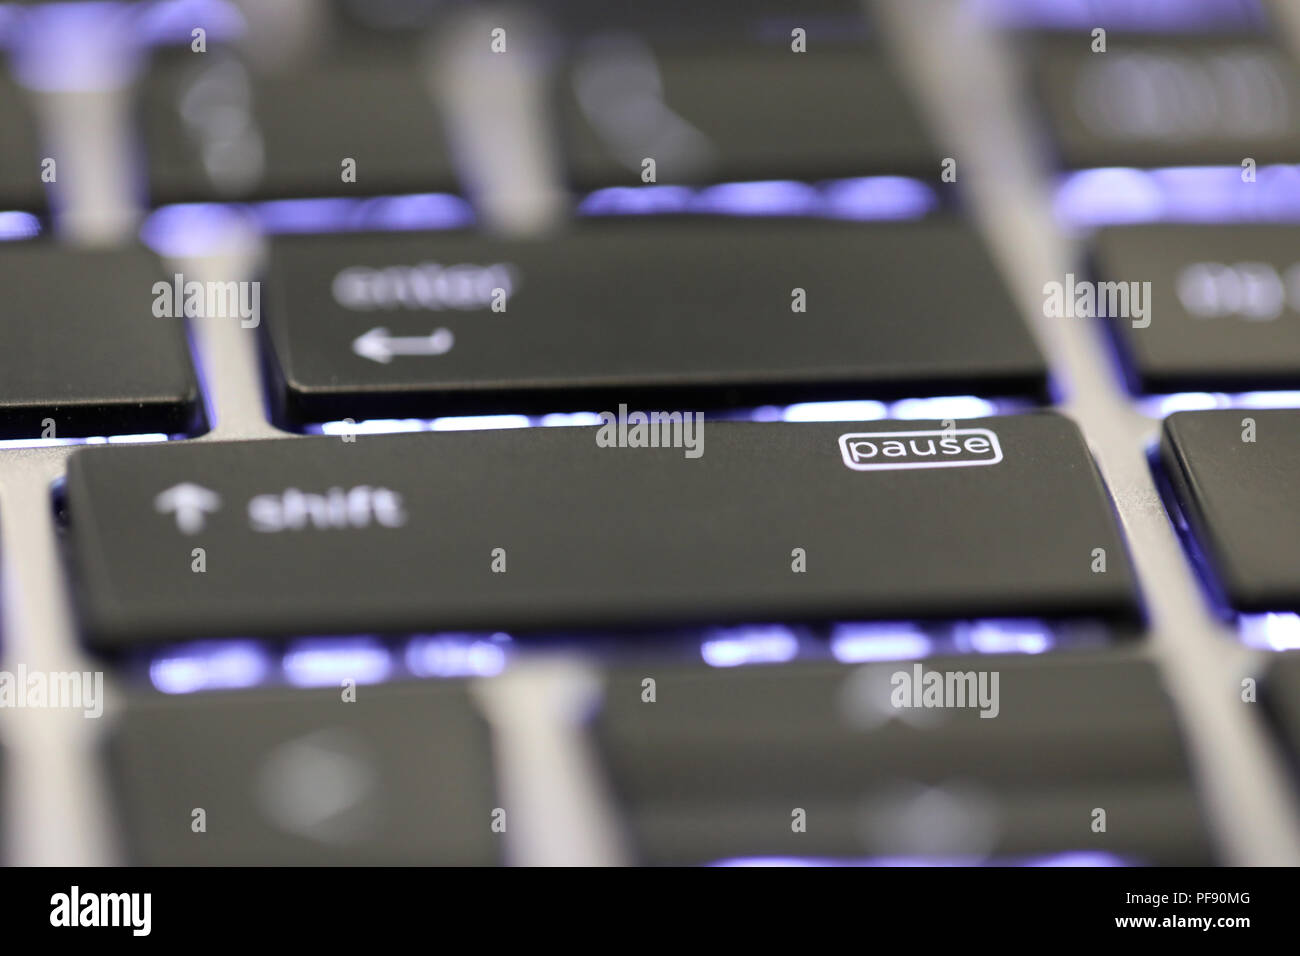 close up of the pause key button symbol special character on an illuminated keyboard on a laptop or computer. Stock Photo